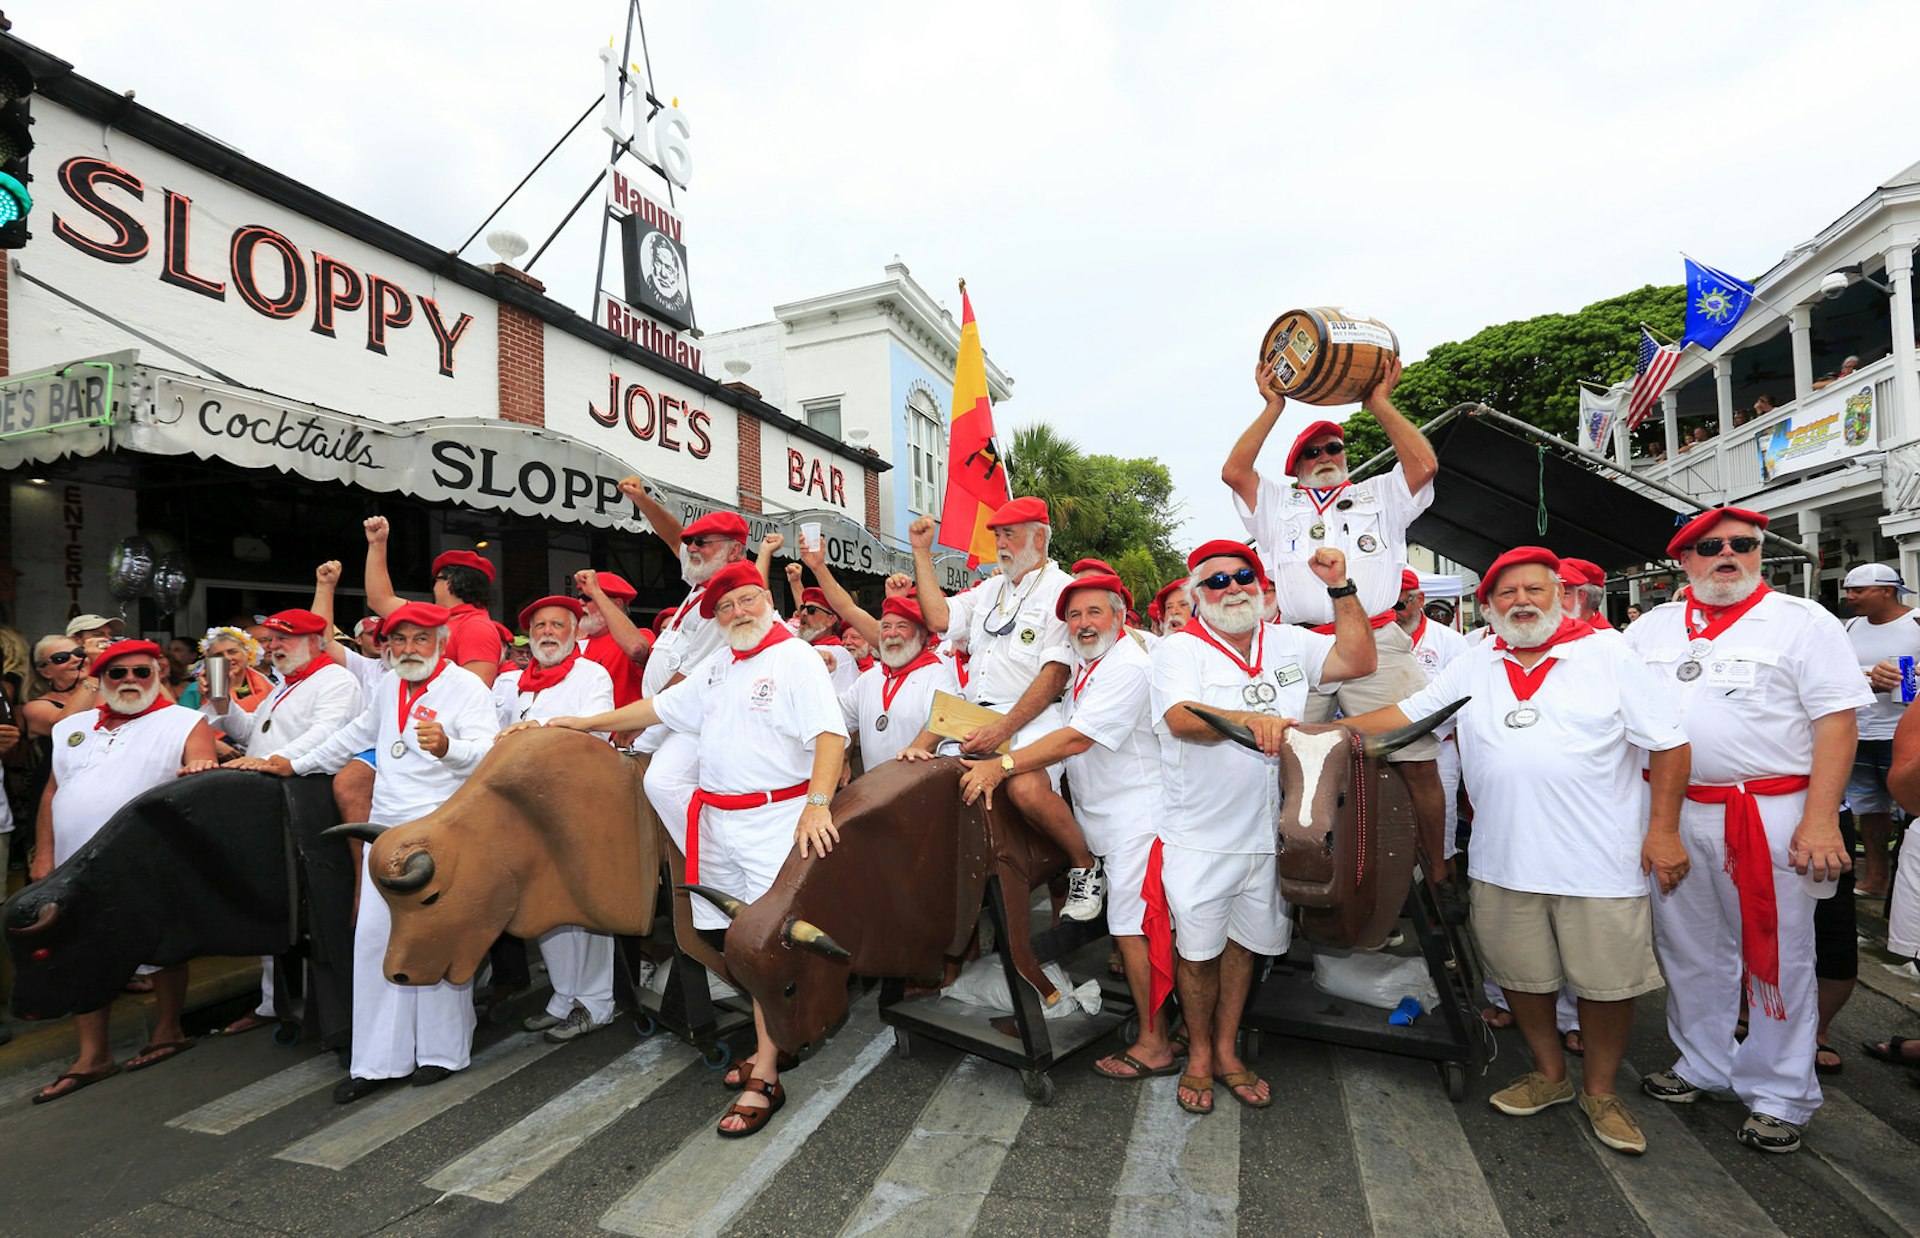 Hemingway look-alikes attending "Running of the Bulls" during the 35th annual Hemingway Days festival on the street of Key West with Sloppy Joe's Bar in the background.